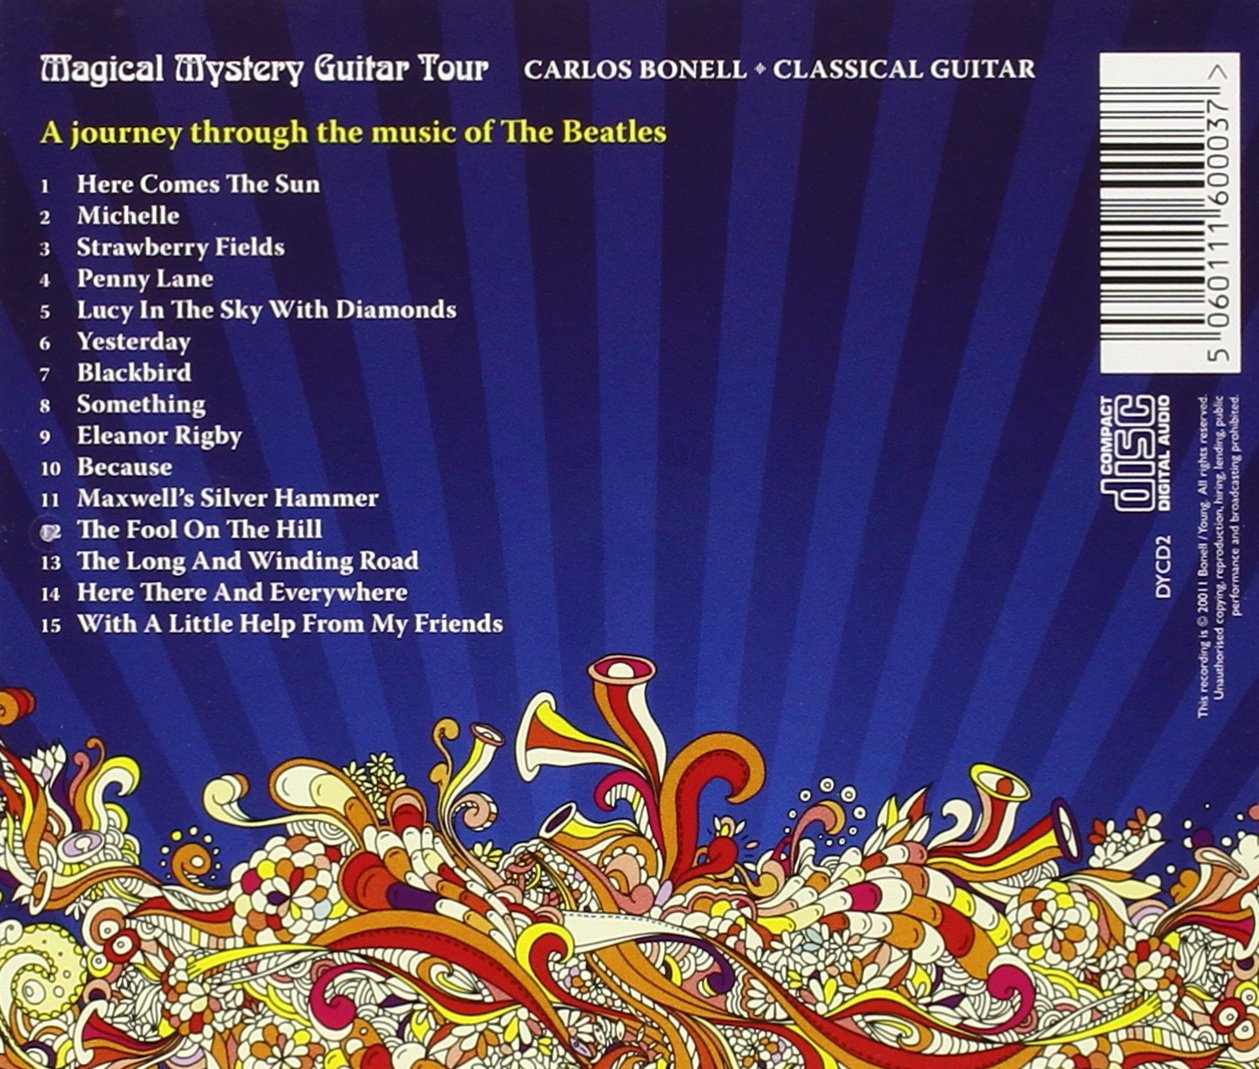 MAGICAL MYSTERY GUITAR TOUR (MUSIC OF THE BEATLES) - CARLOS BONELL